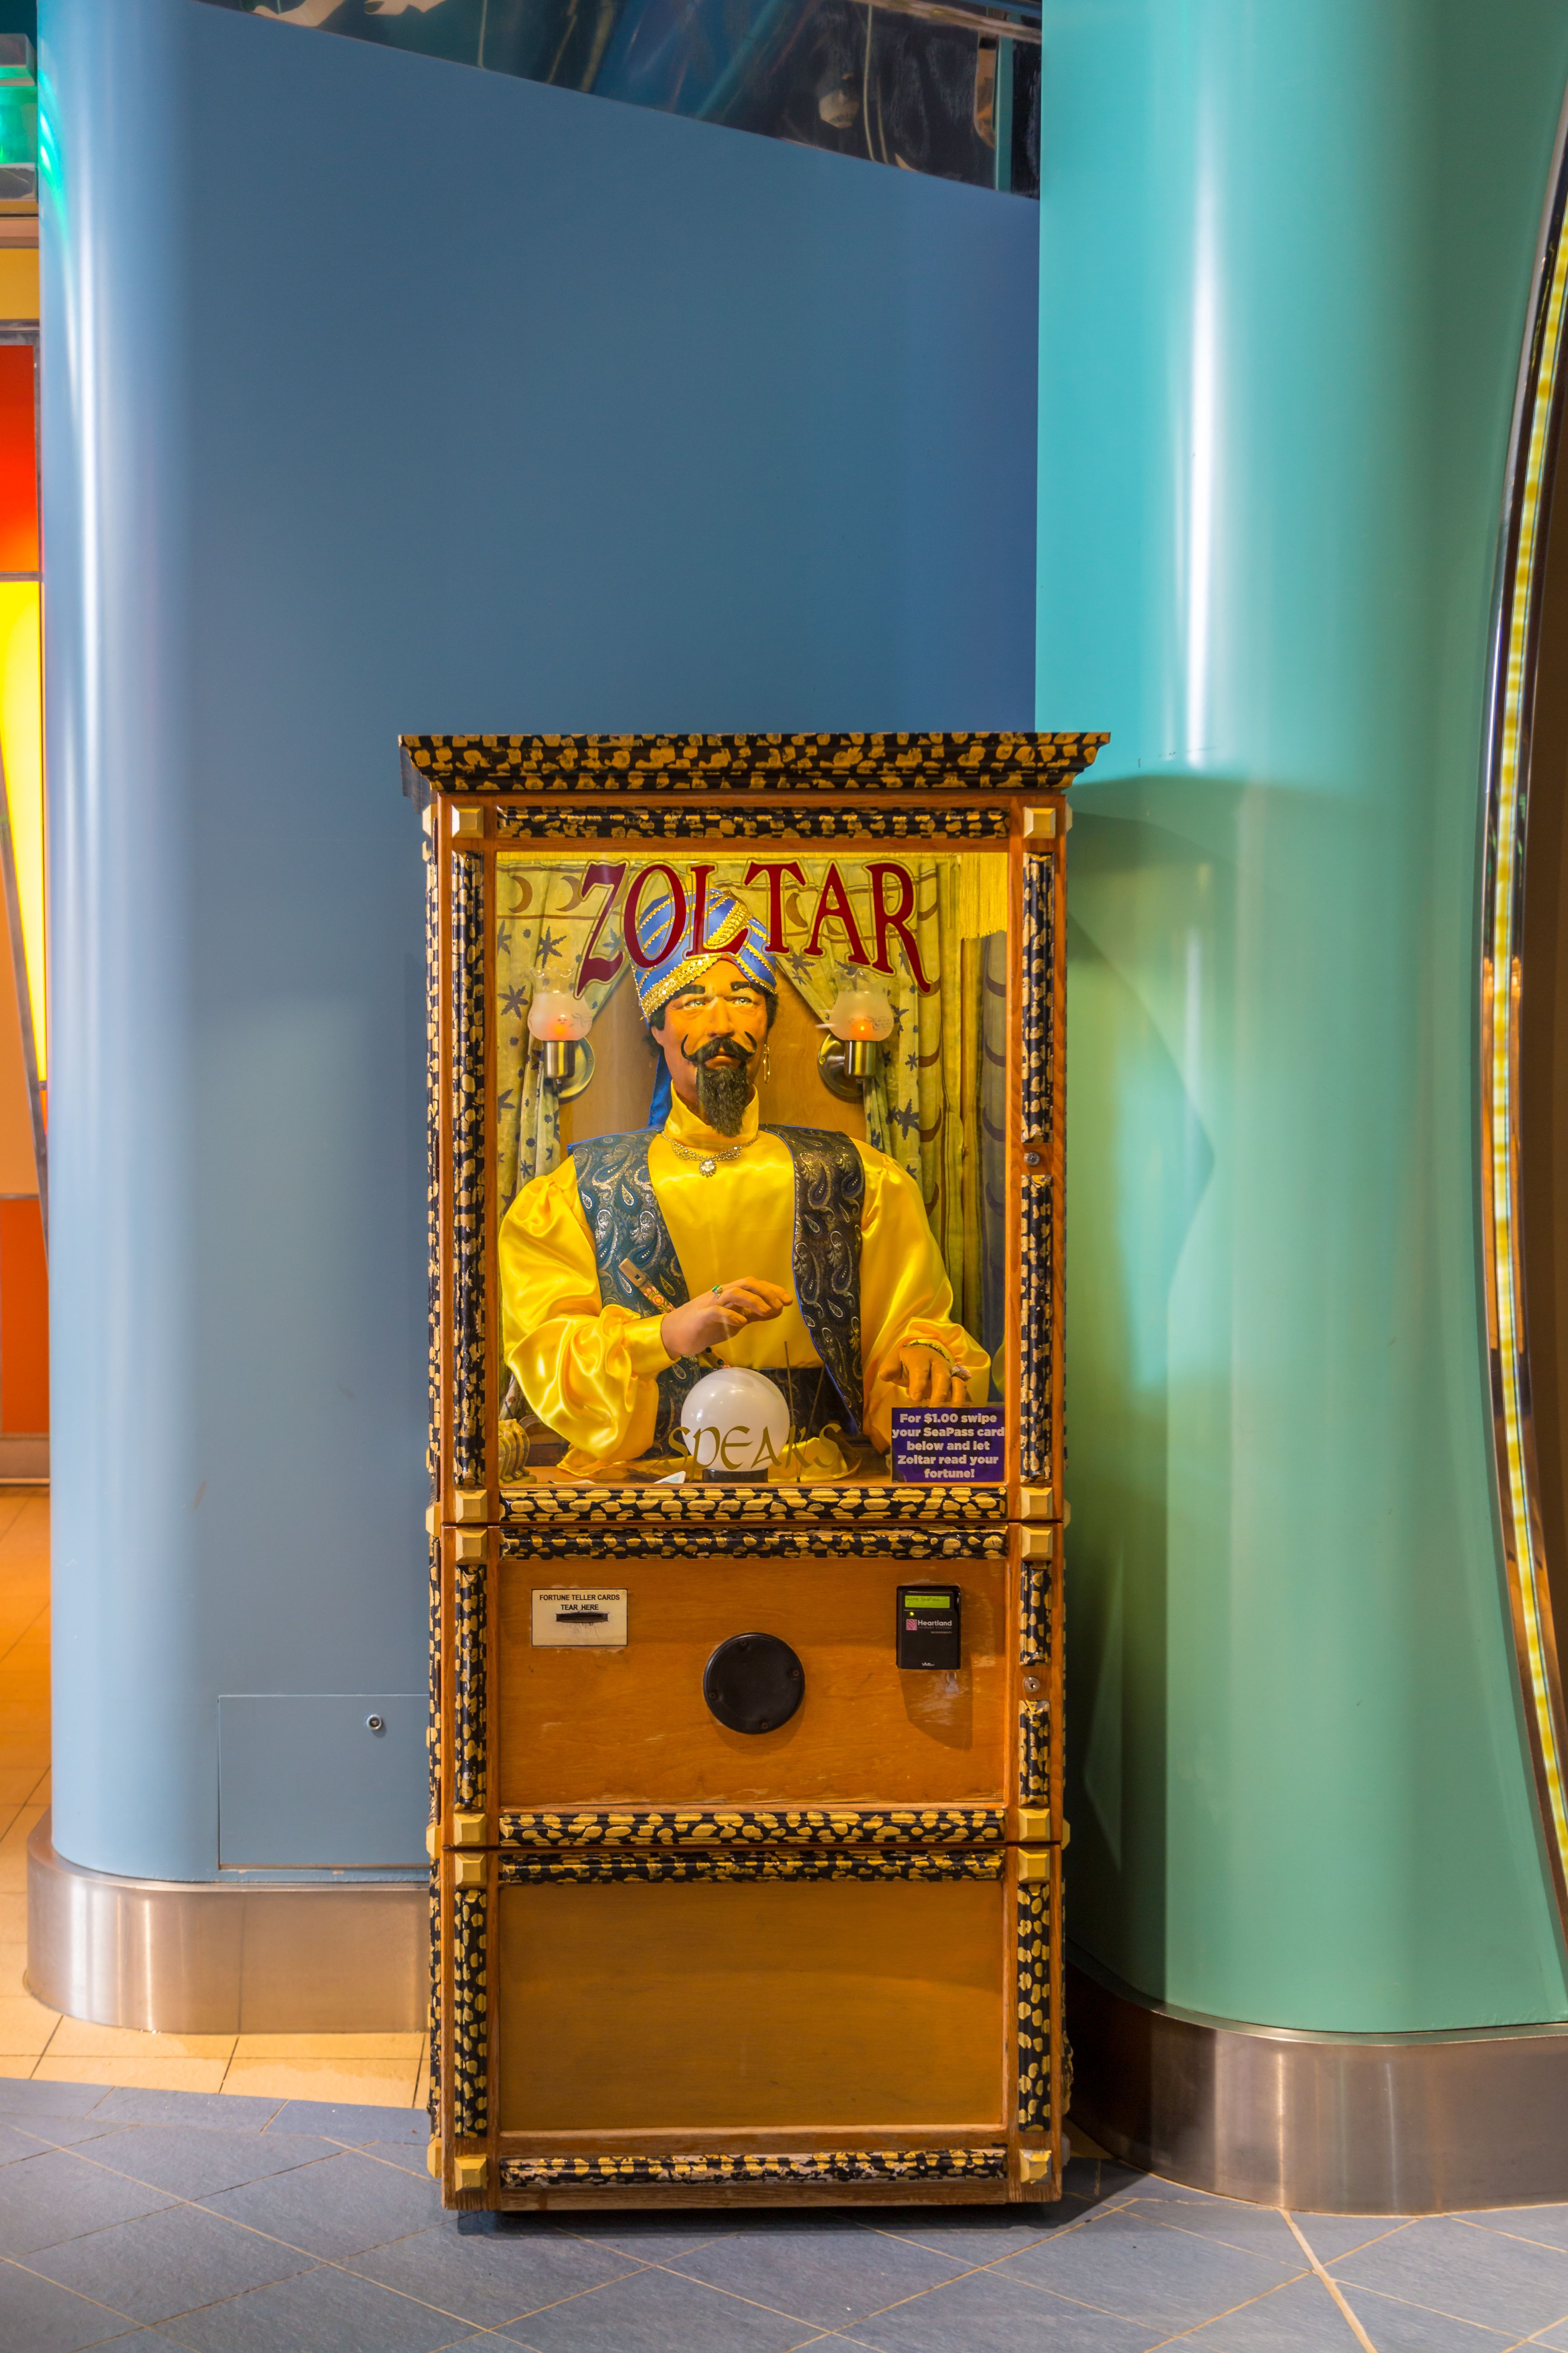 Zoltar fortune telling arcade machine on the Royal Caribbean Allure of the Seas cruise ship